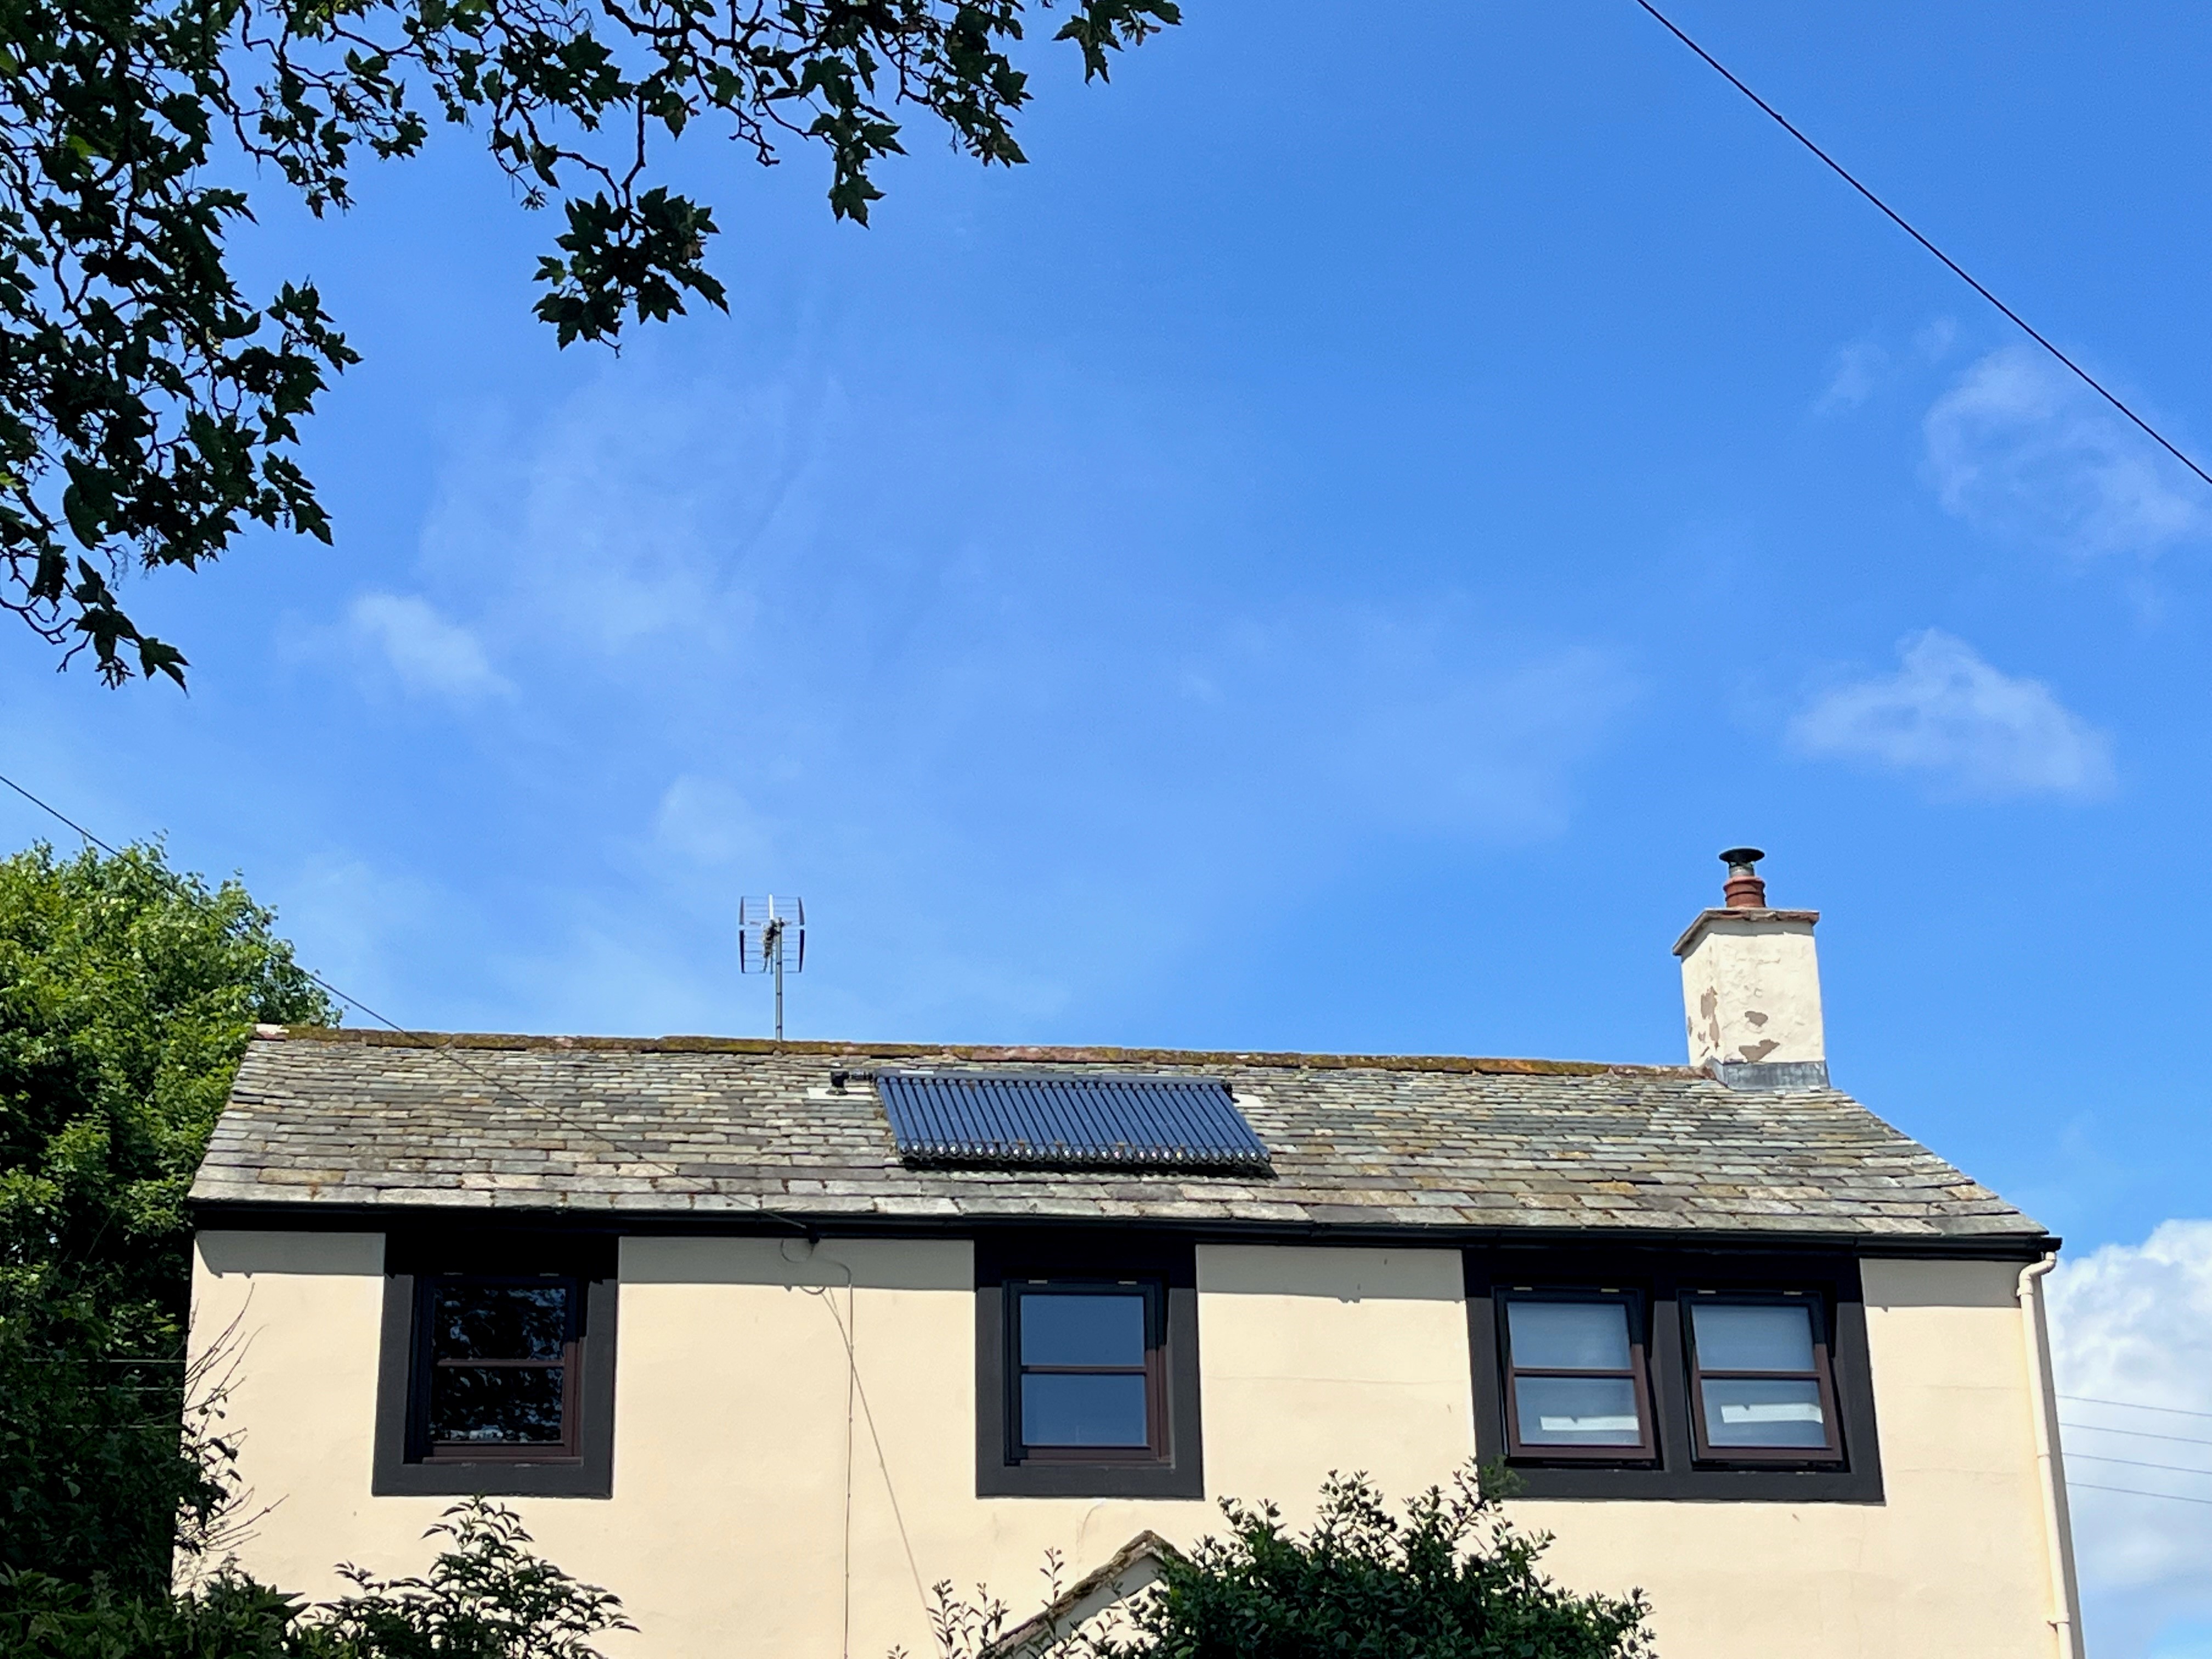 Slate in Askham with solar thermal